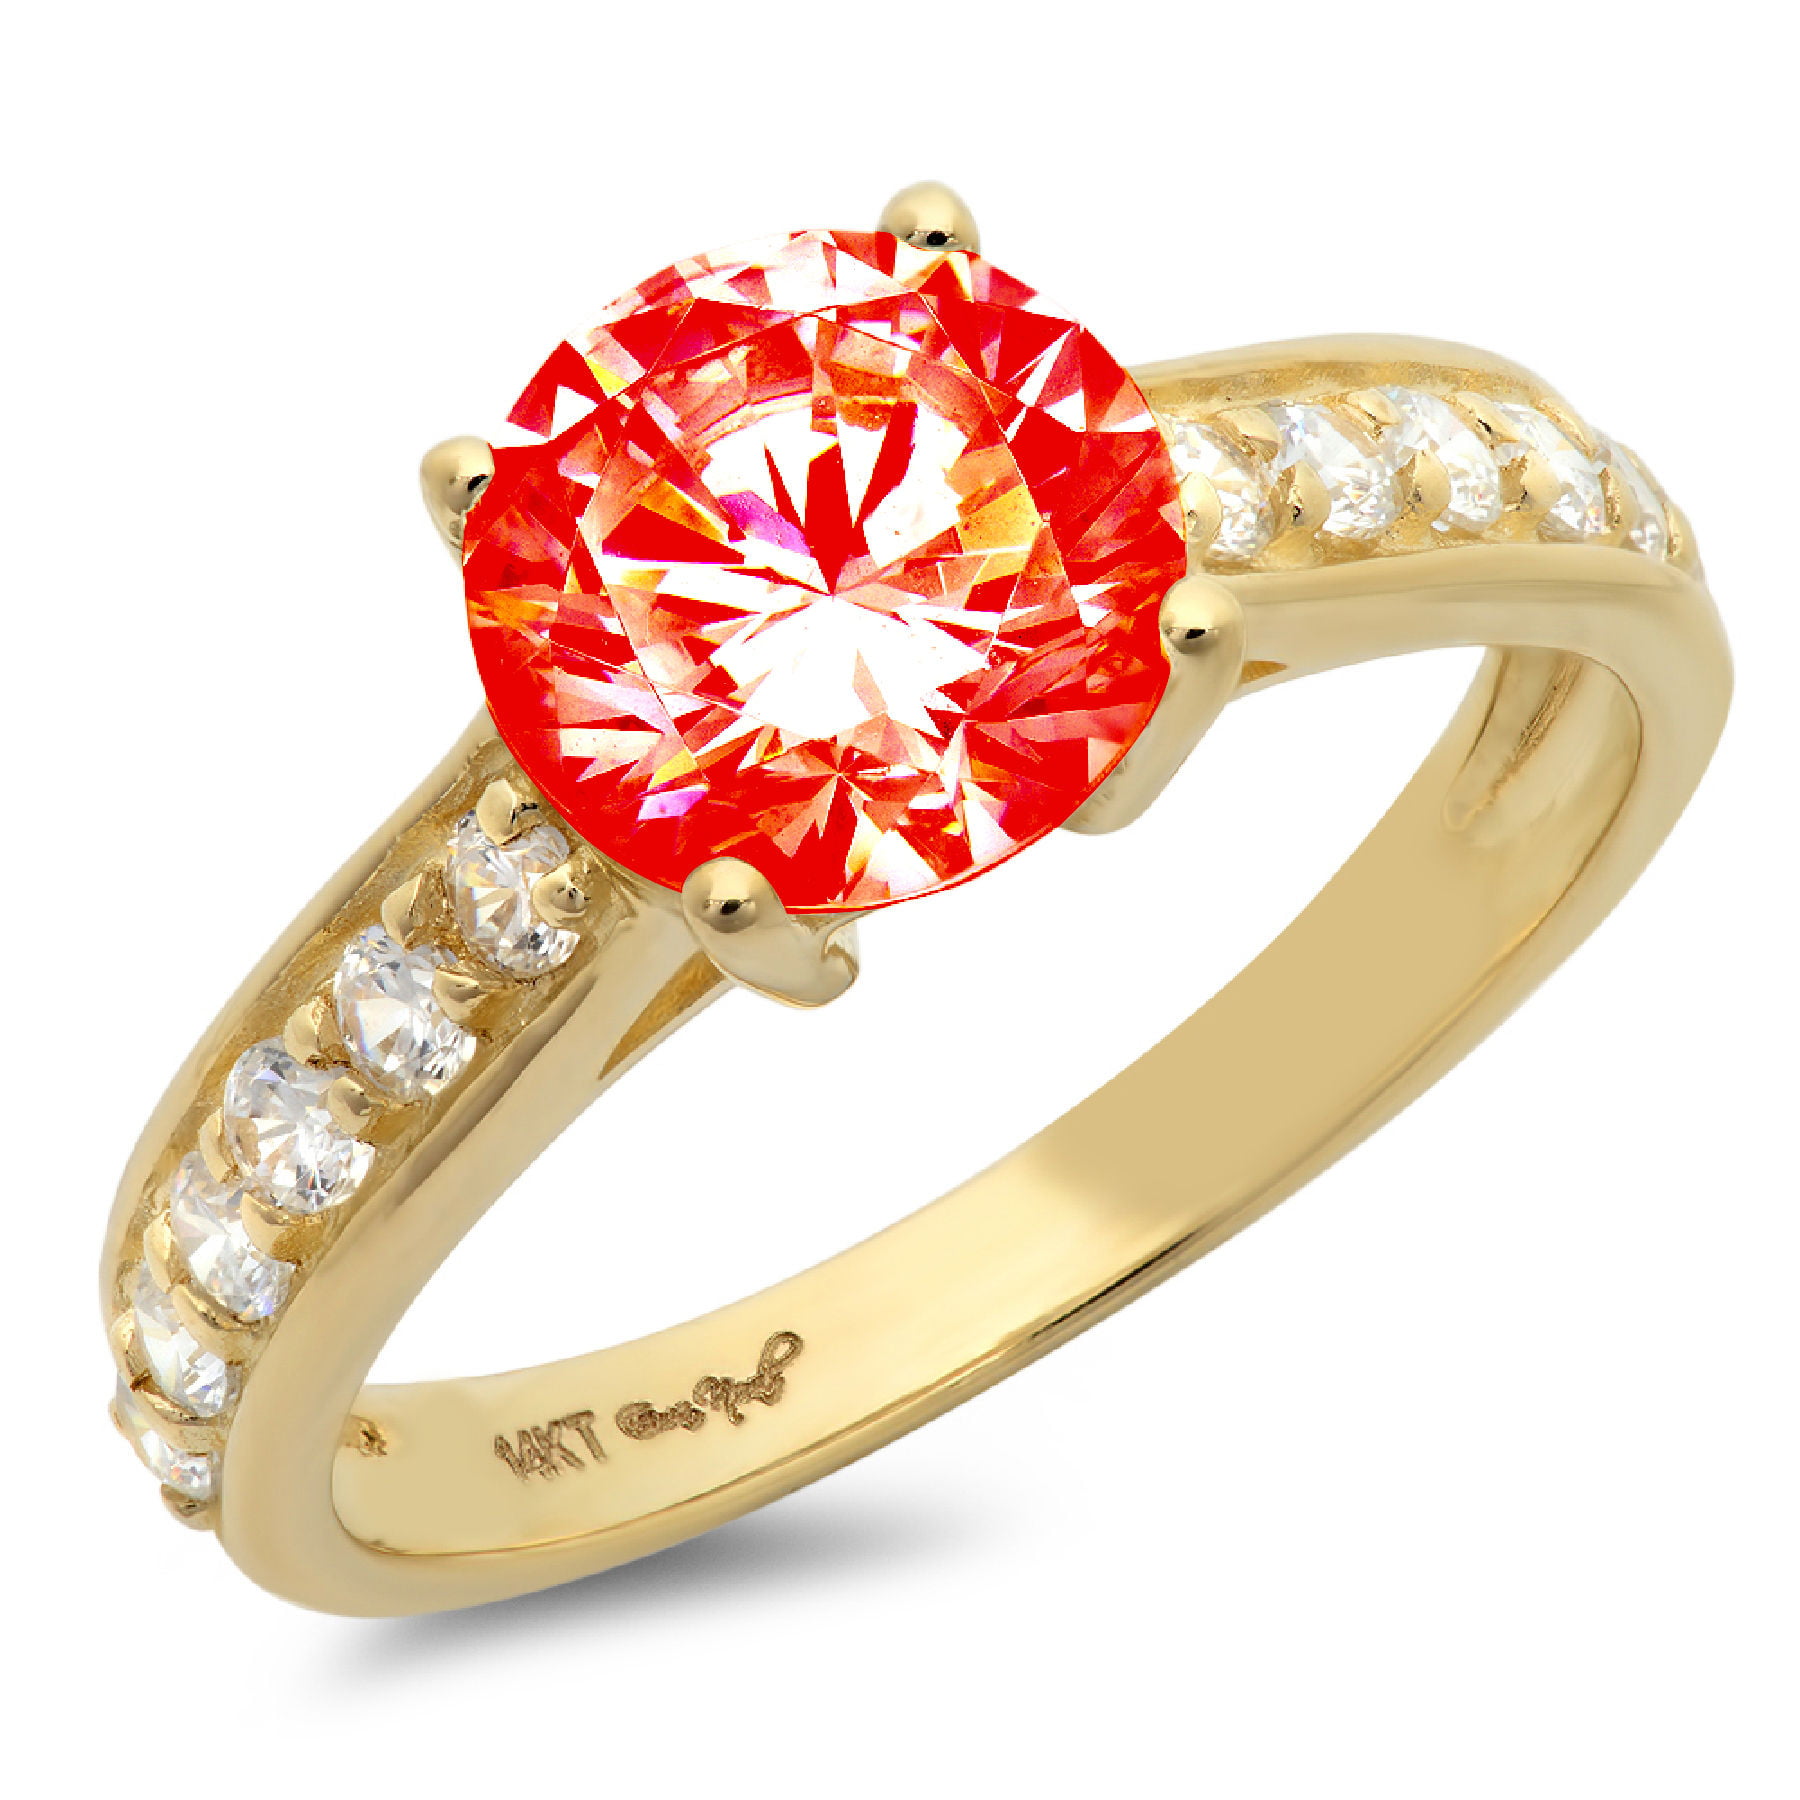 3 ct Brilliant Round Cut VVS1 Red Simulated Diamond Yellow Solid 14k or 18k Gold Robotic Laser Engraved Handmade Anniversary Solitaire Ring